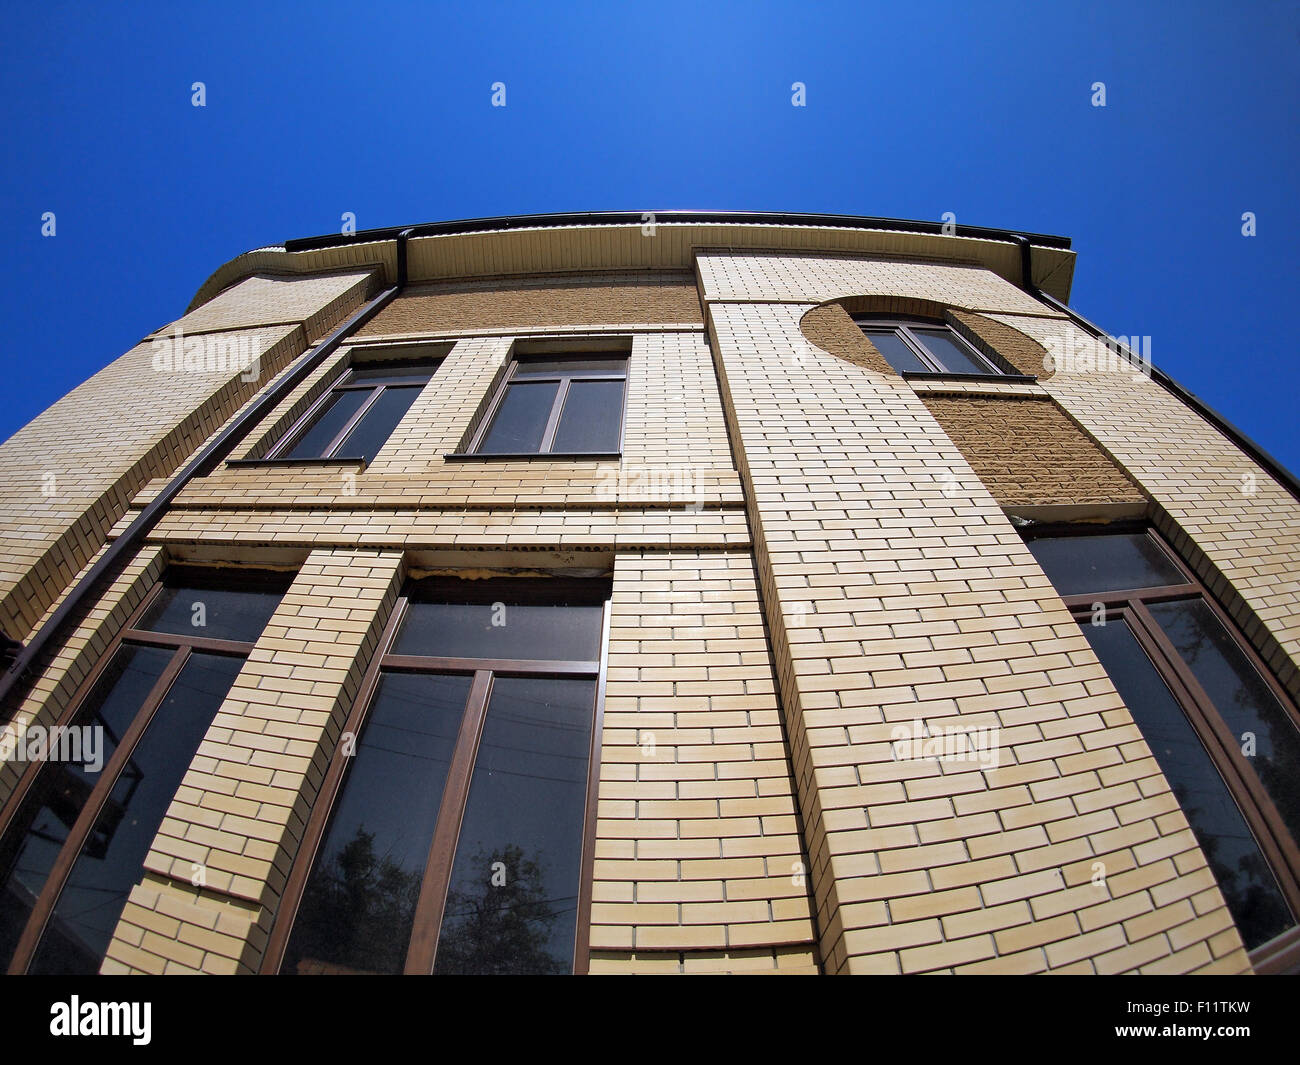 New office building, view from below against the bright blue sky with wide angle fisheye lens and distortion view Stock Photo